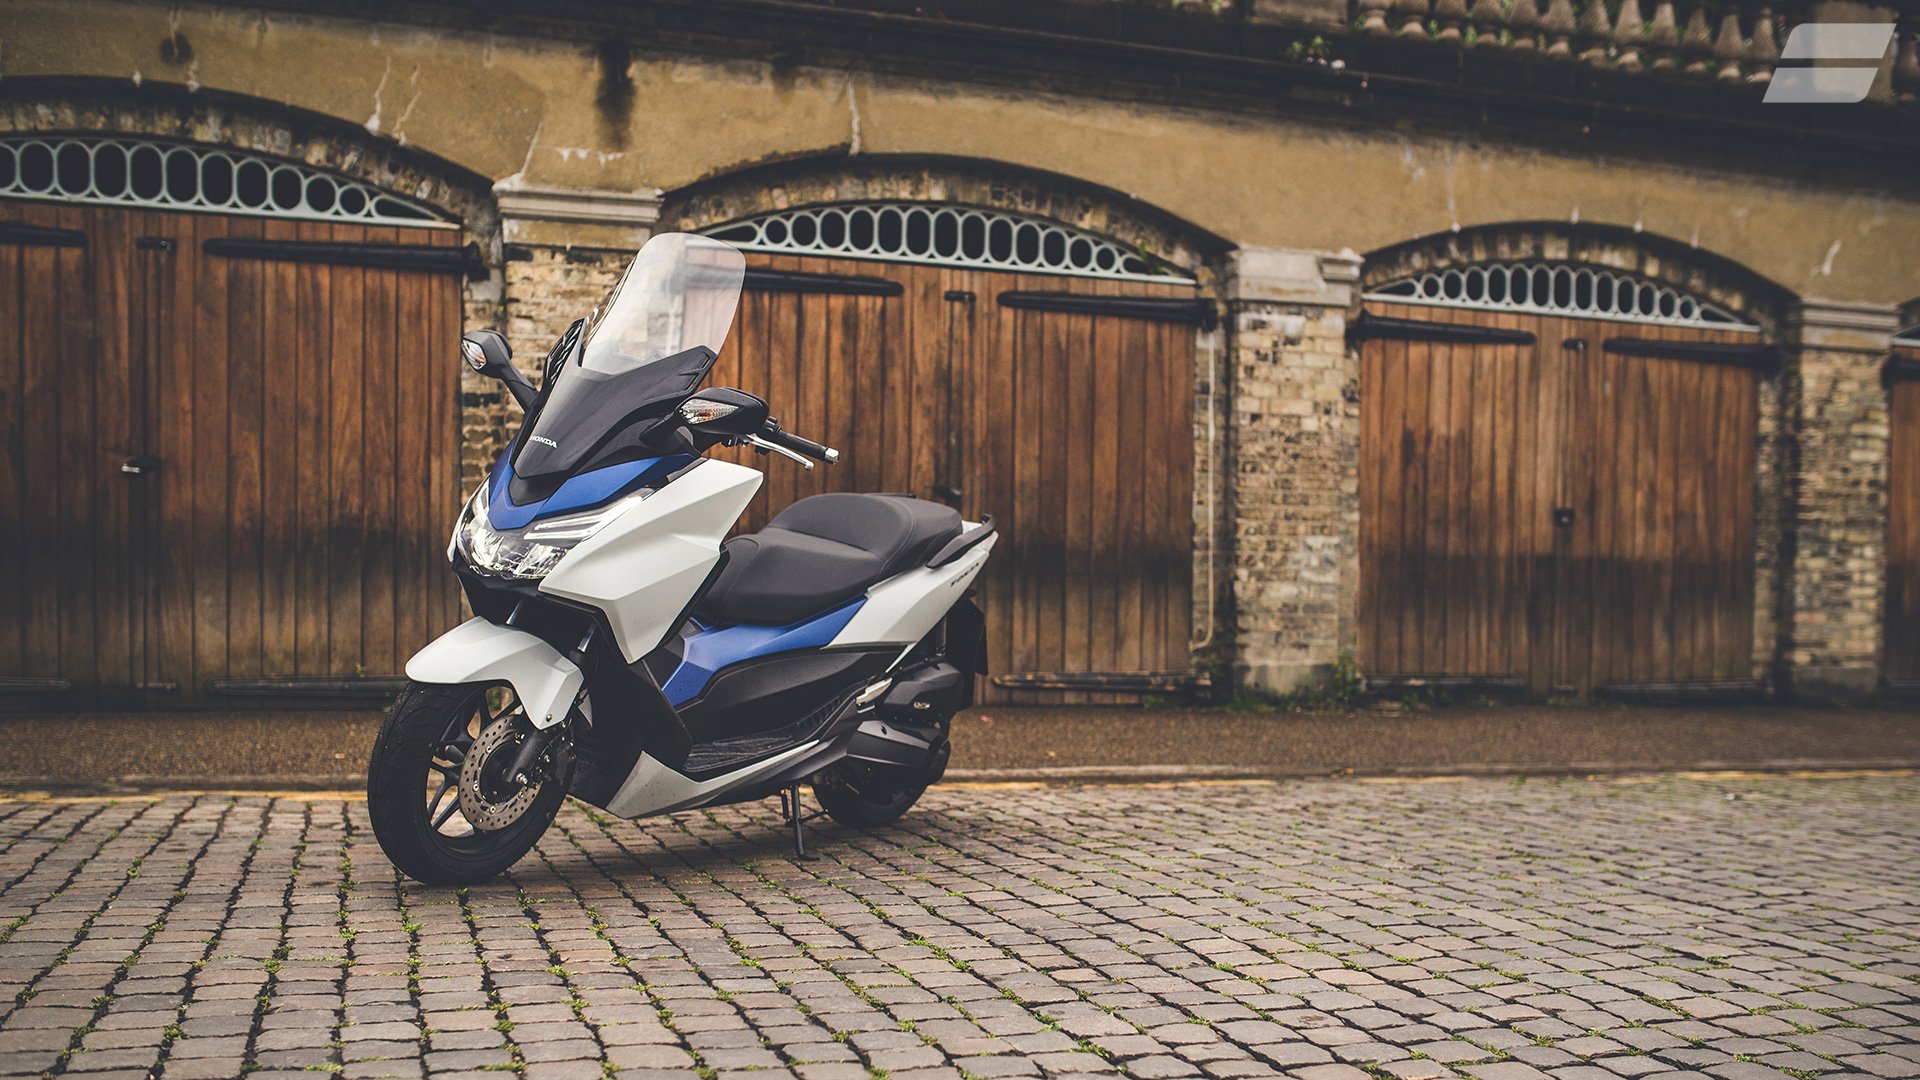 Honda Forza 125 long-term test review - 'Life in the fast lane